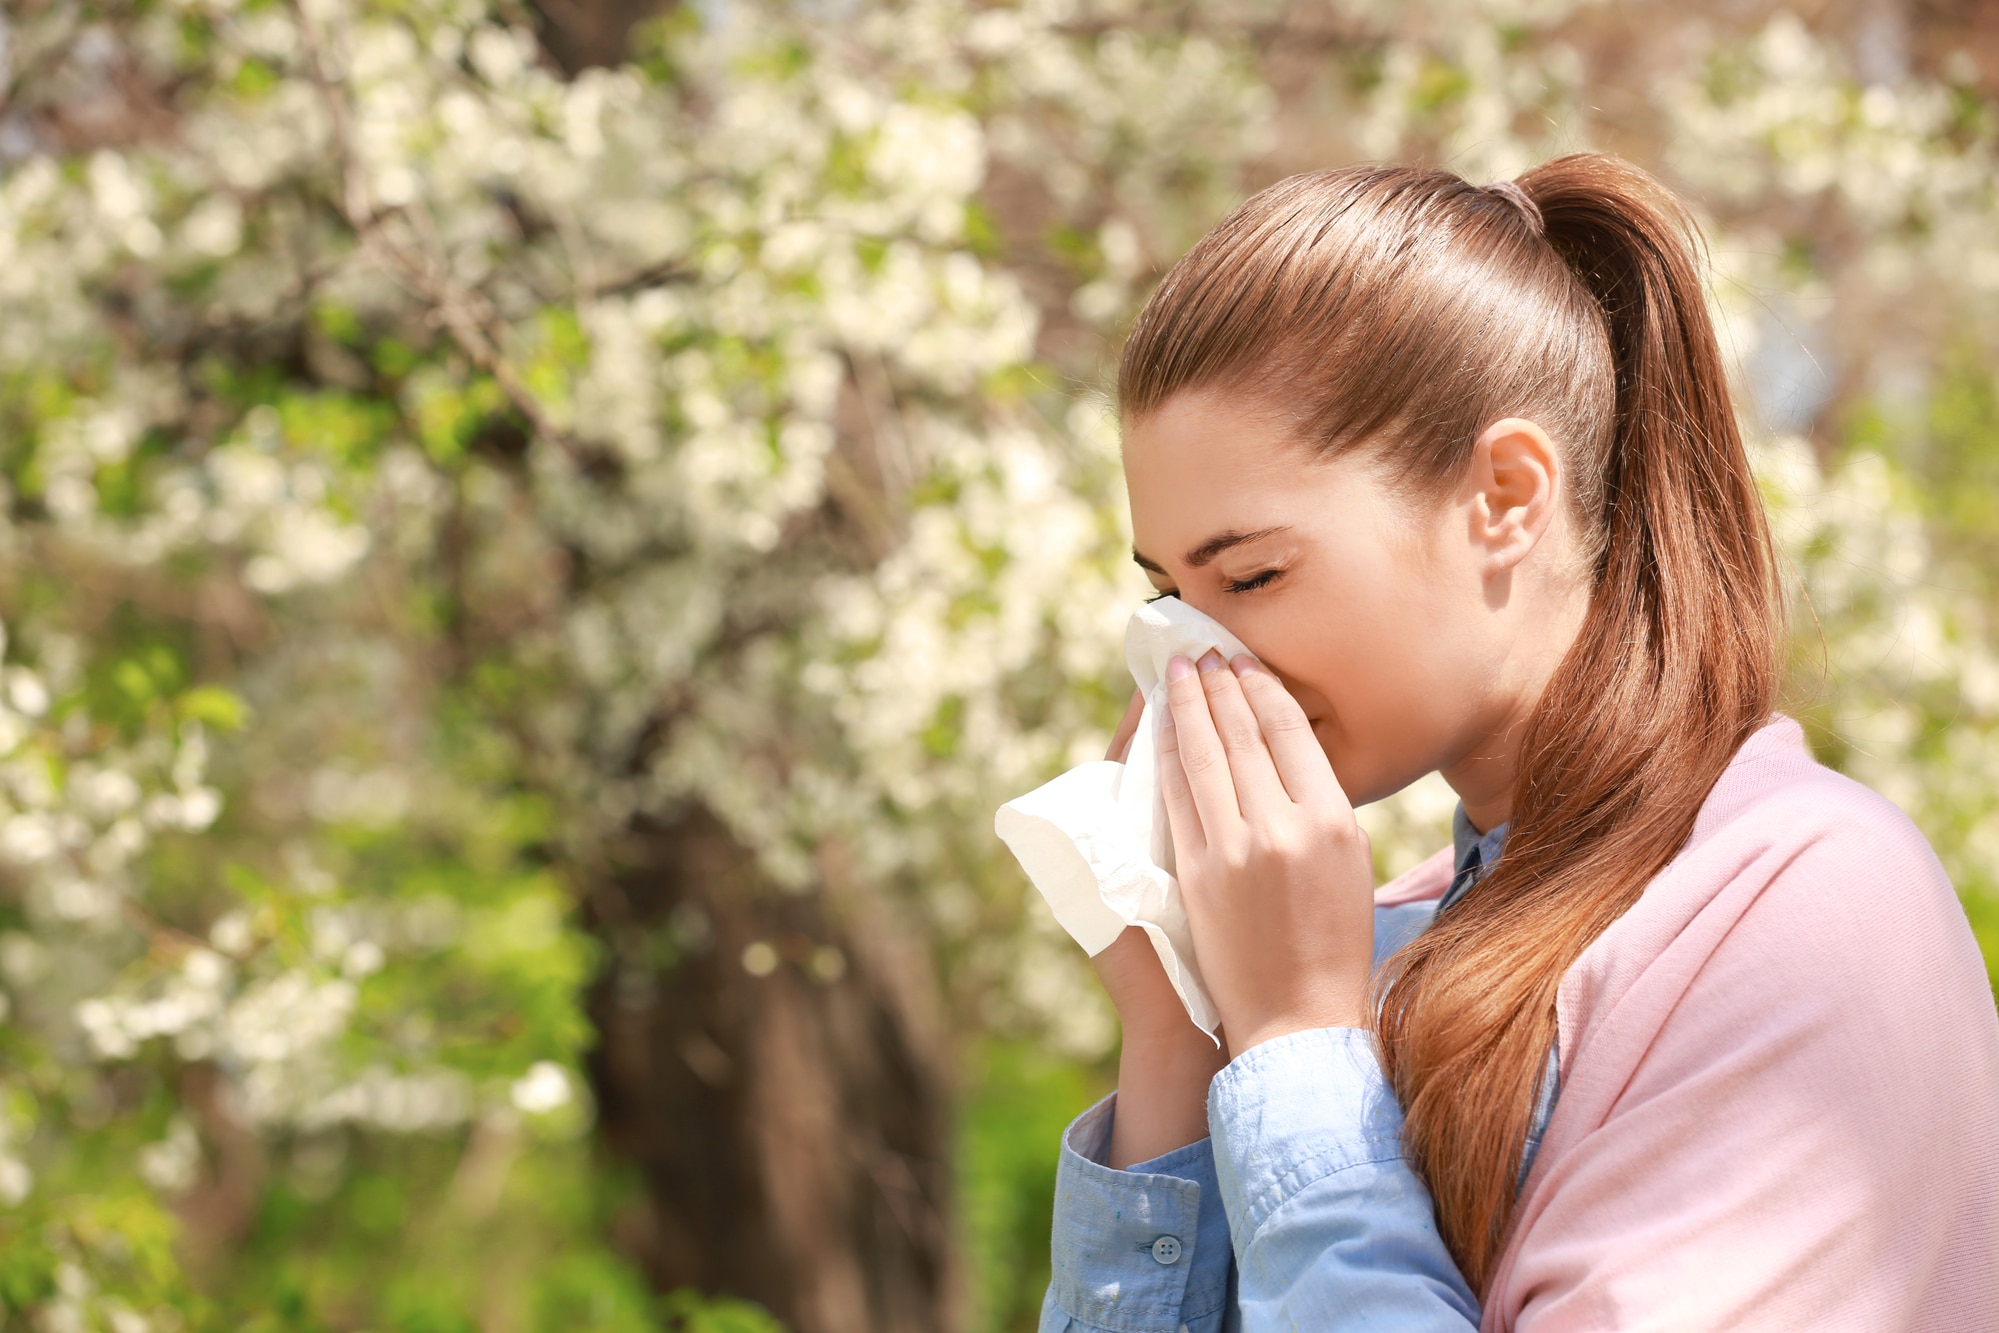 Young woman outdoors sneezing into a tissue.